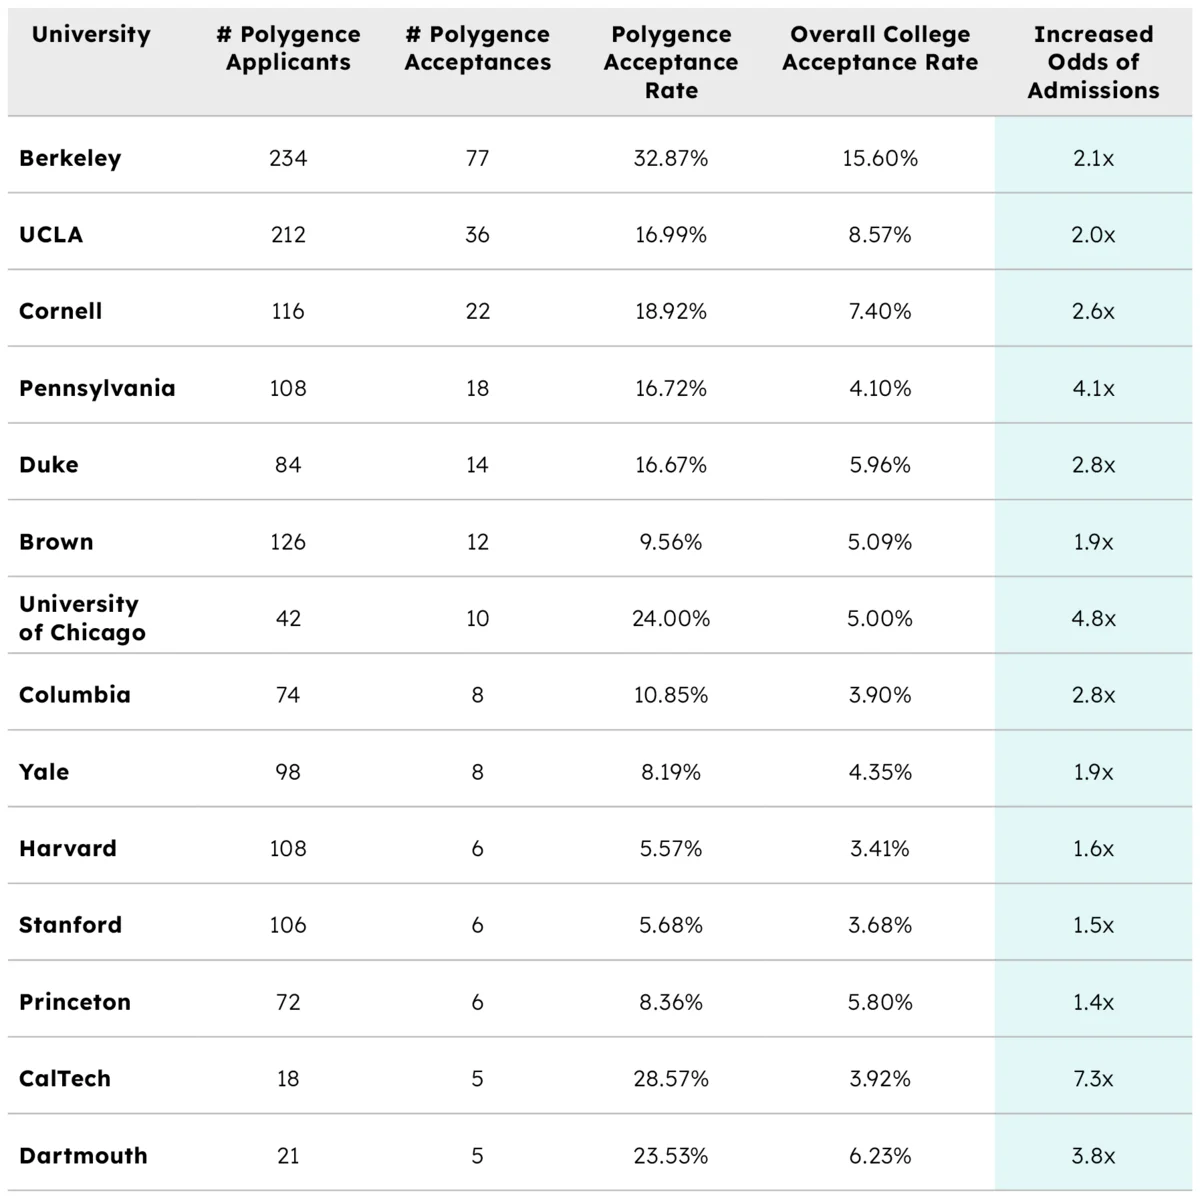 Research Project Impact on College Admission Outcomes | Polygence